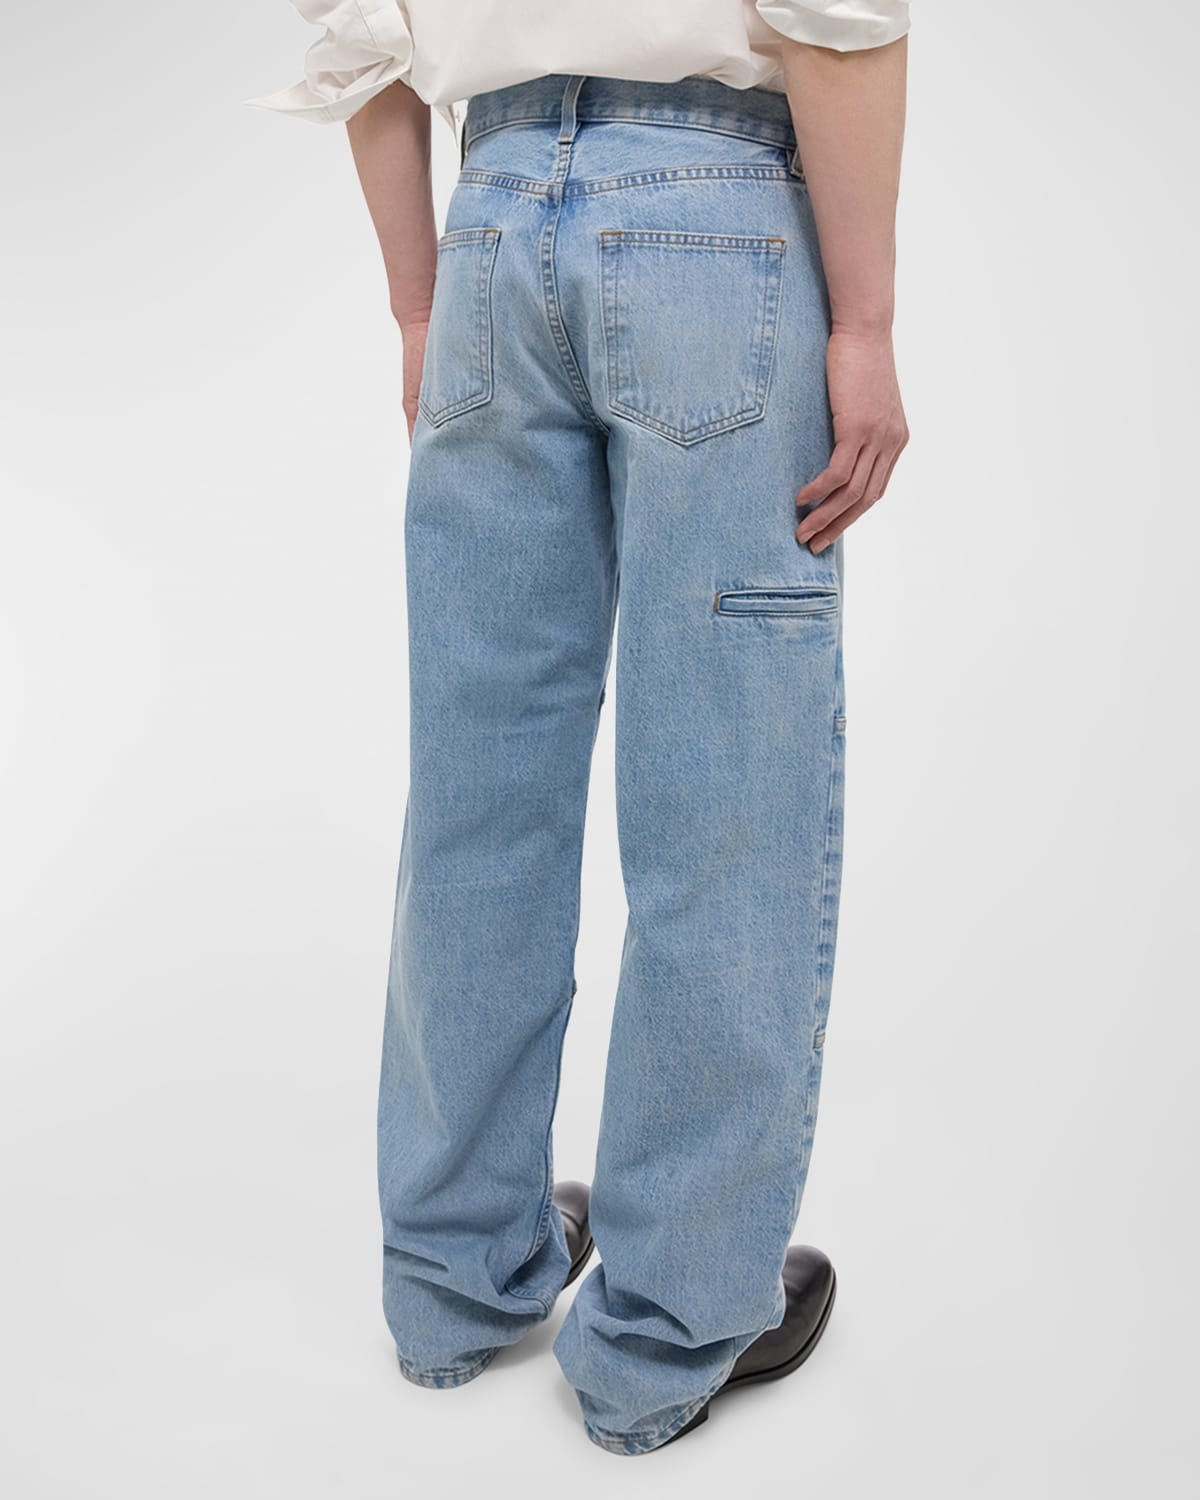 Men's Relaxed-Fit Carpenter Jeans - 4